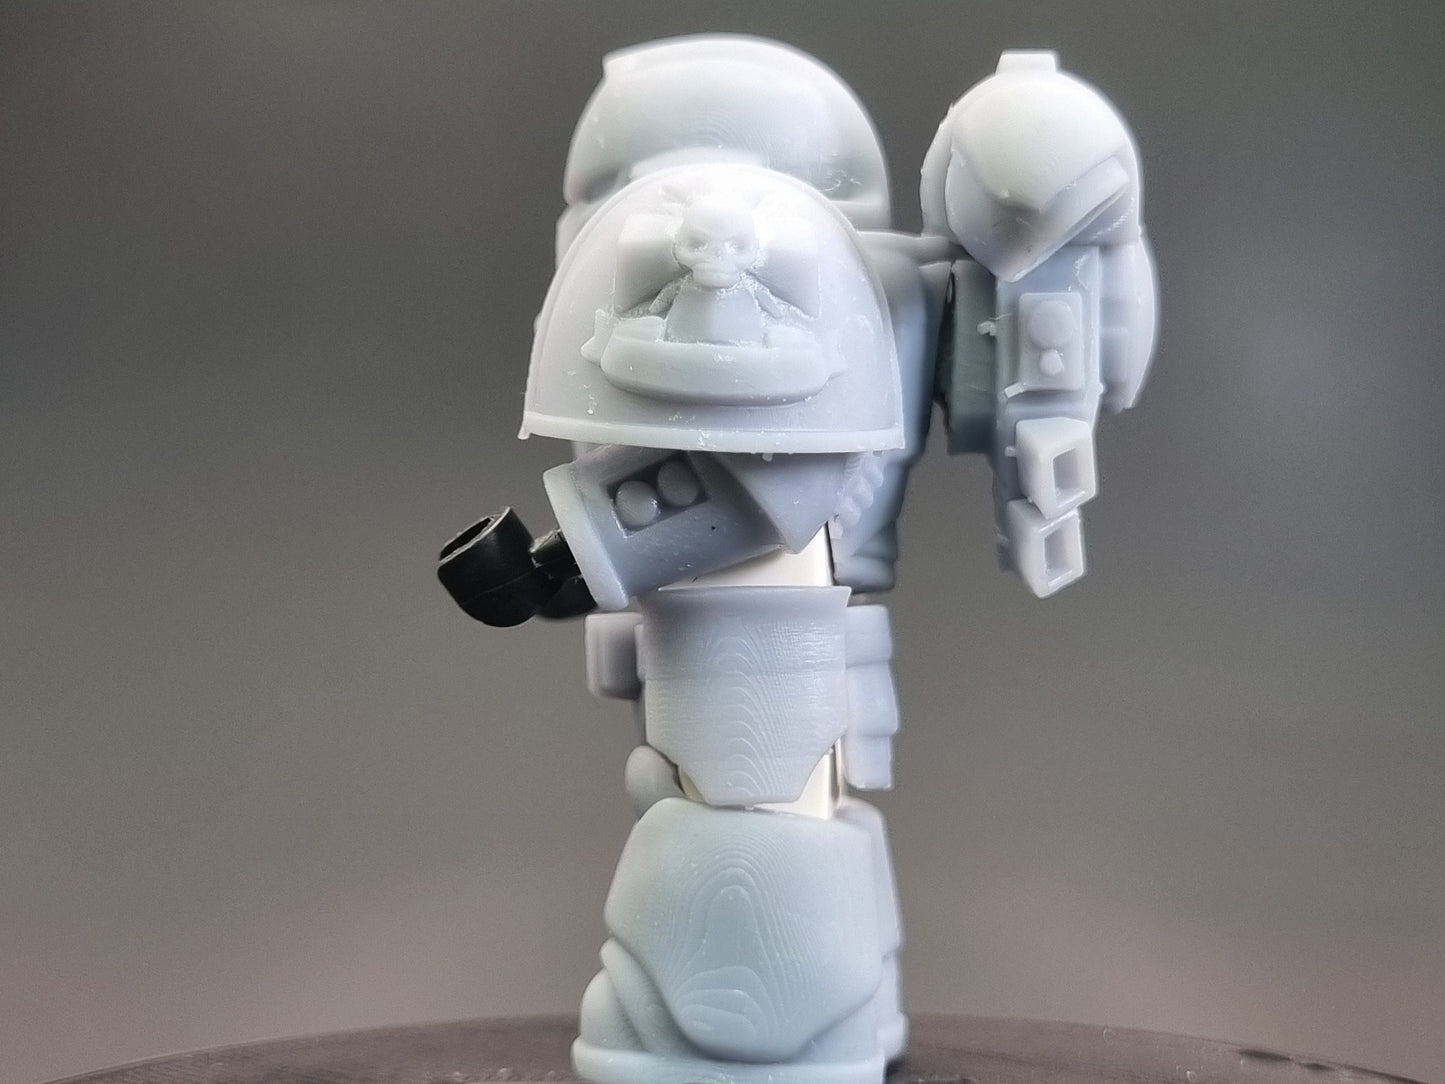 Building toy space warrior templar faction expension pack!